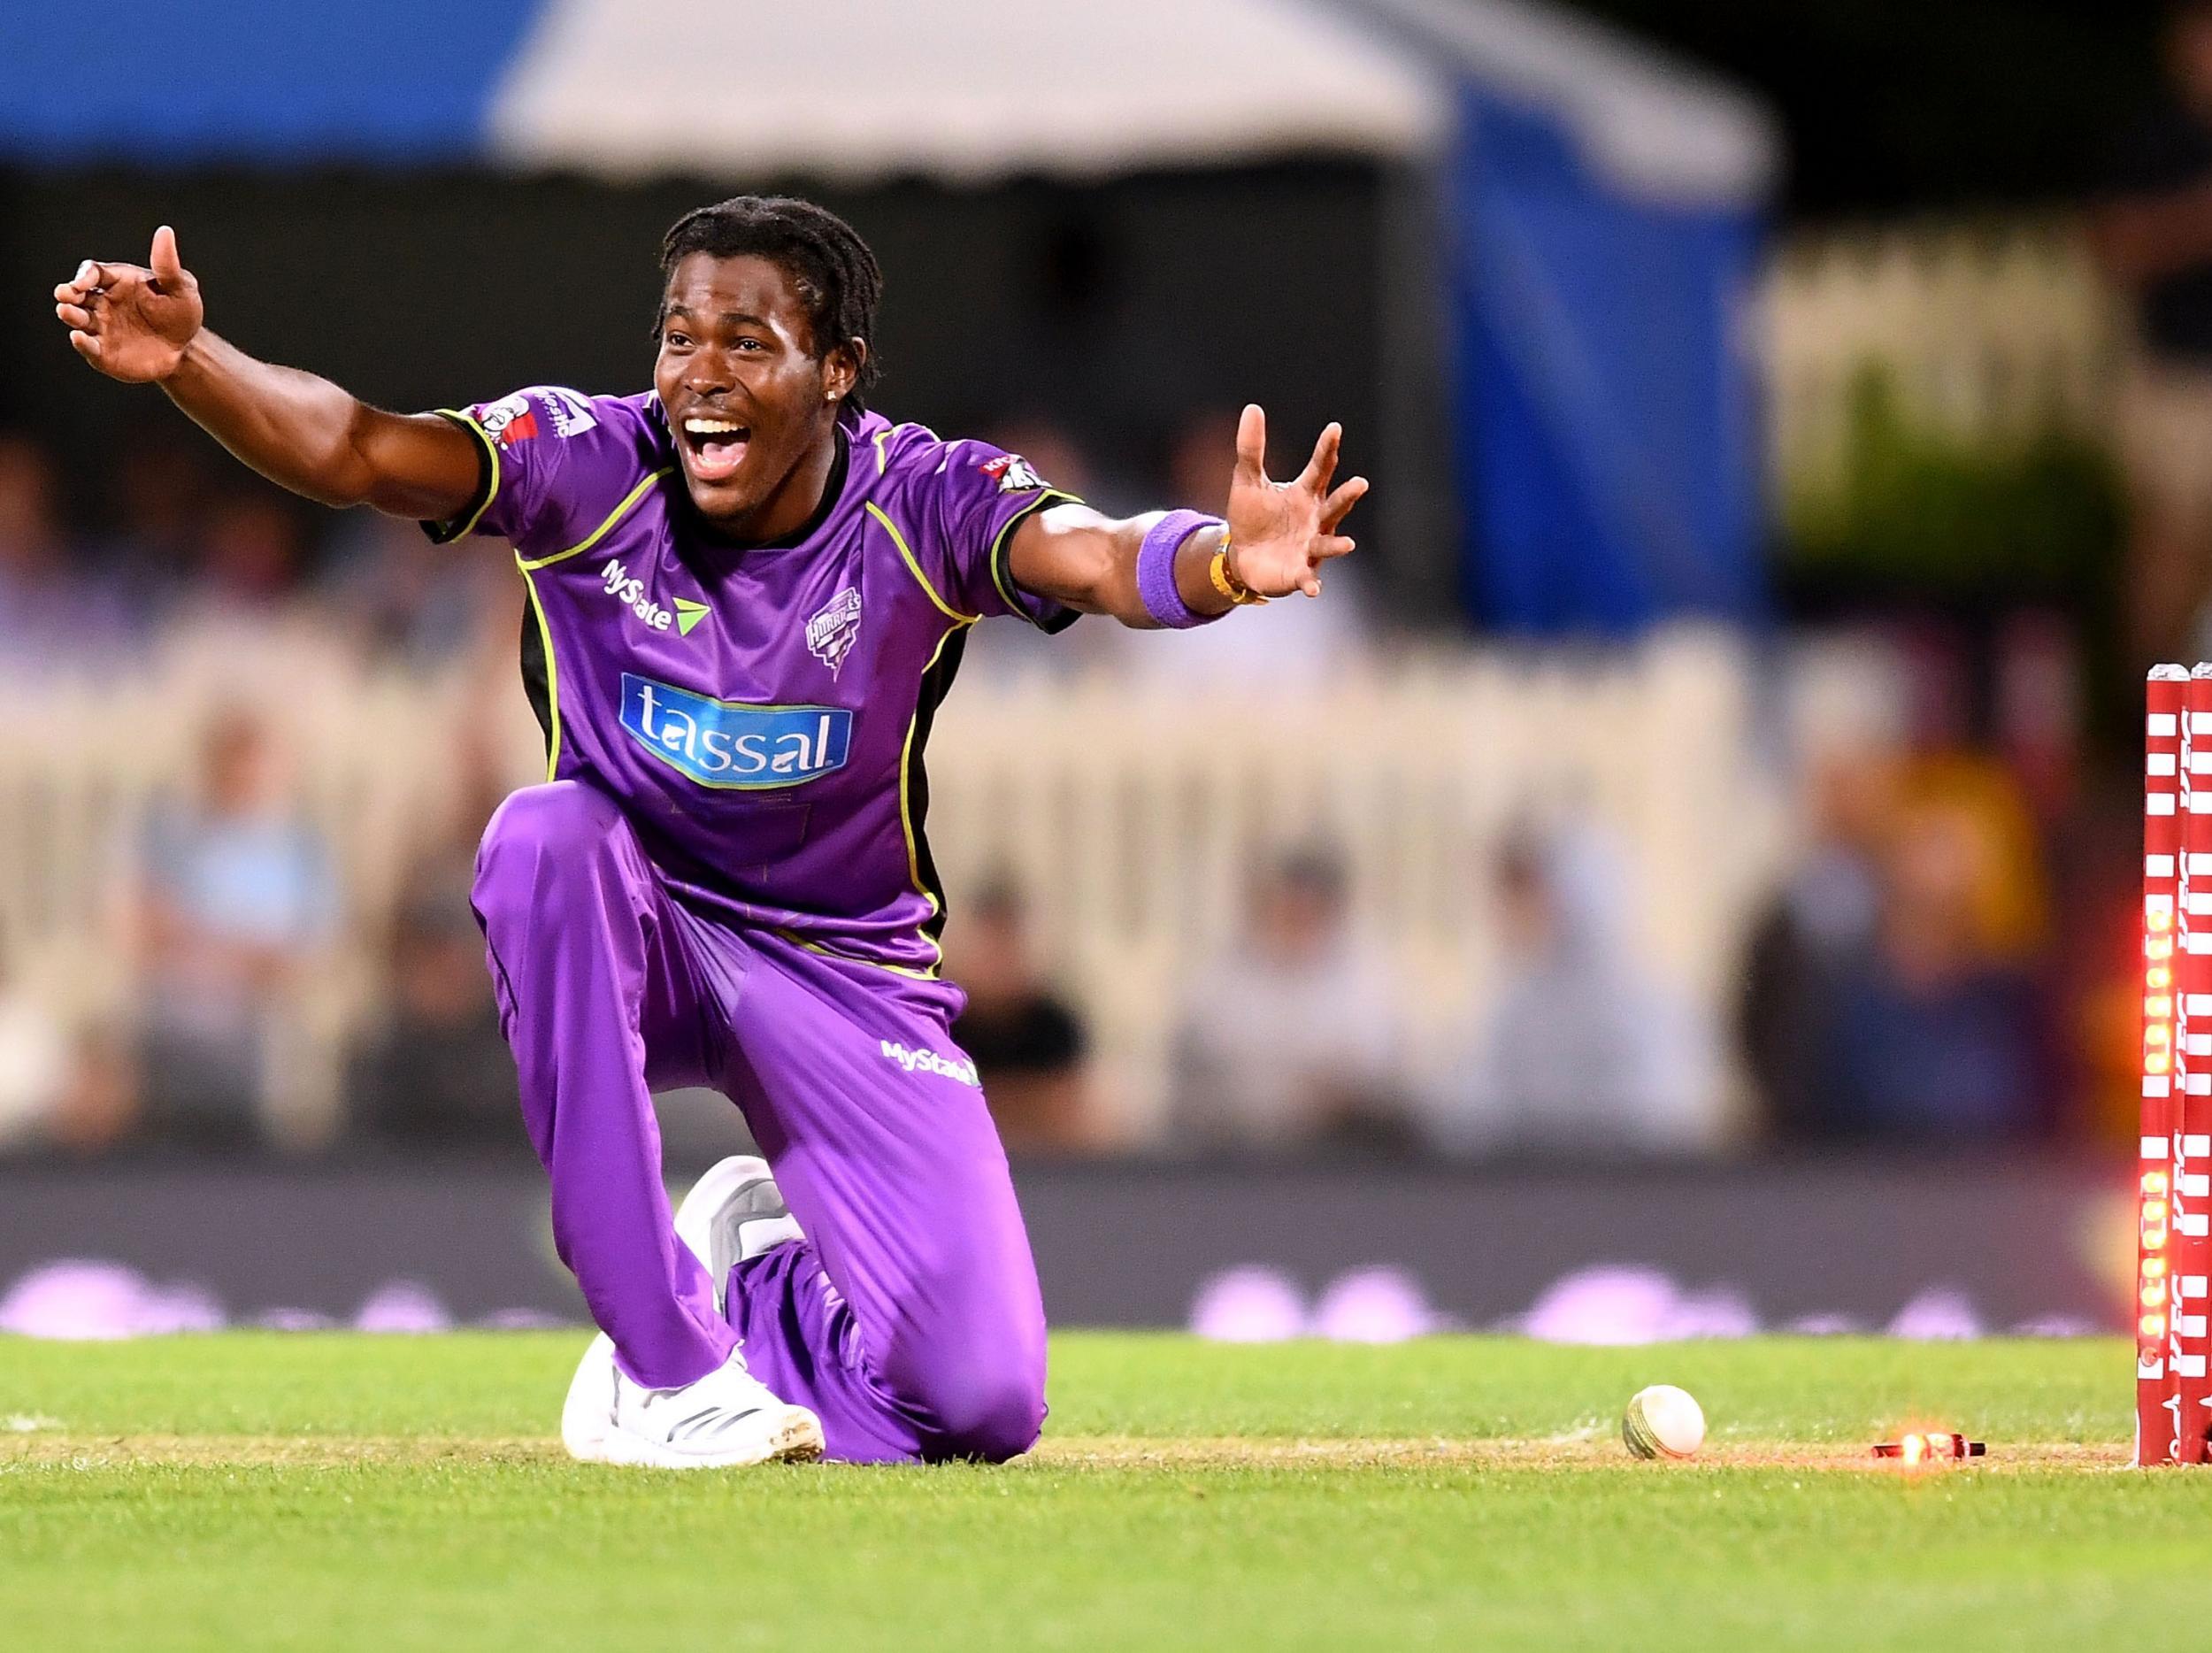 Archer is set to go for big money after hitting the headlines in the Big Bash